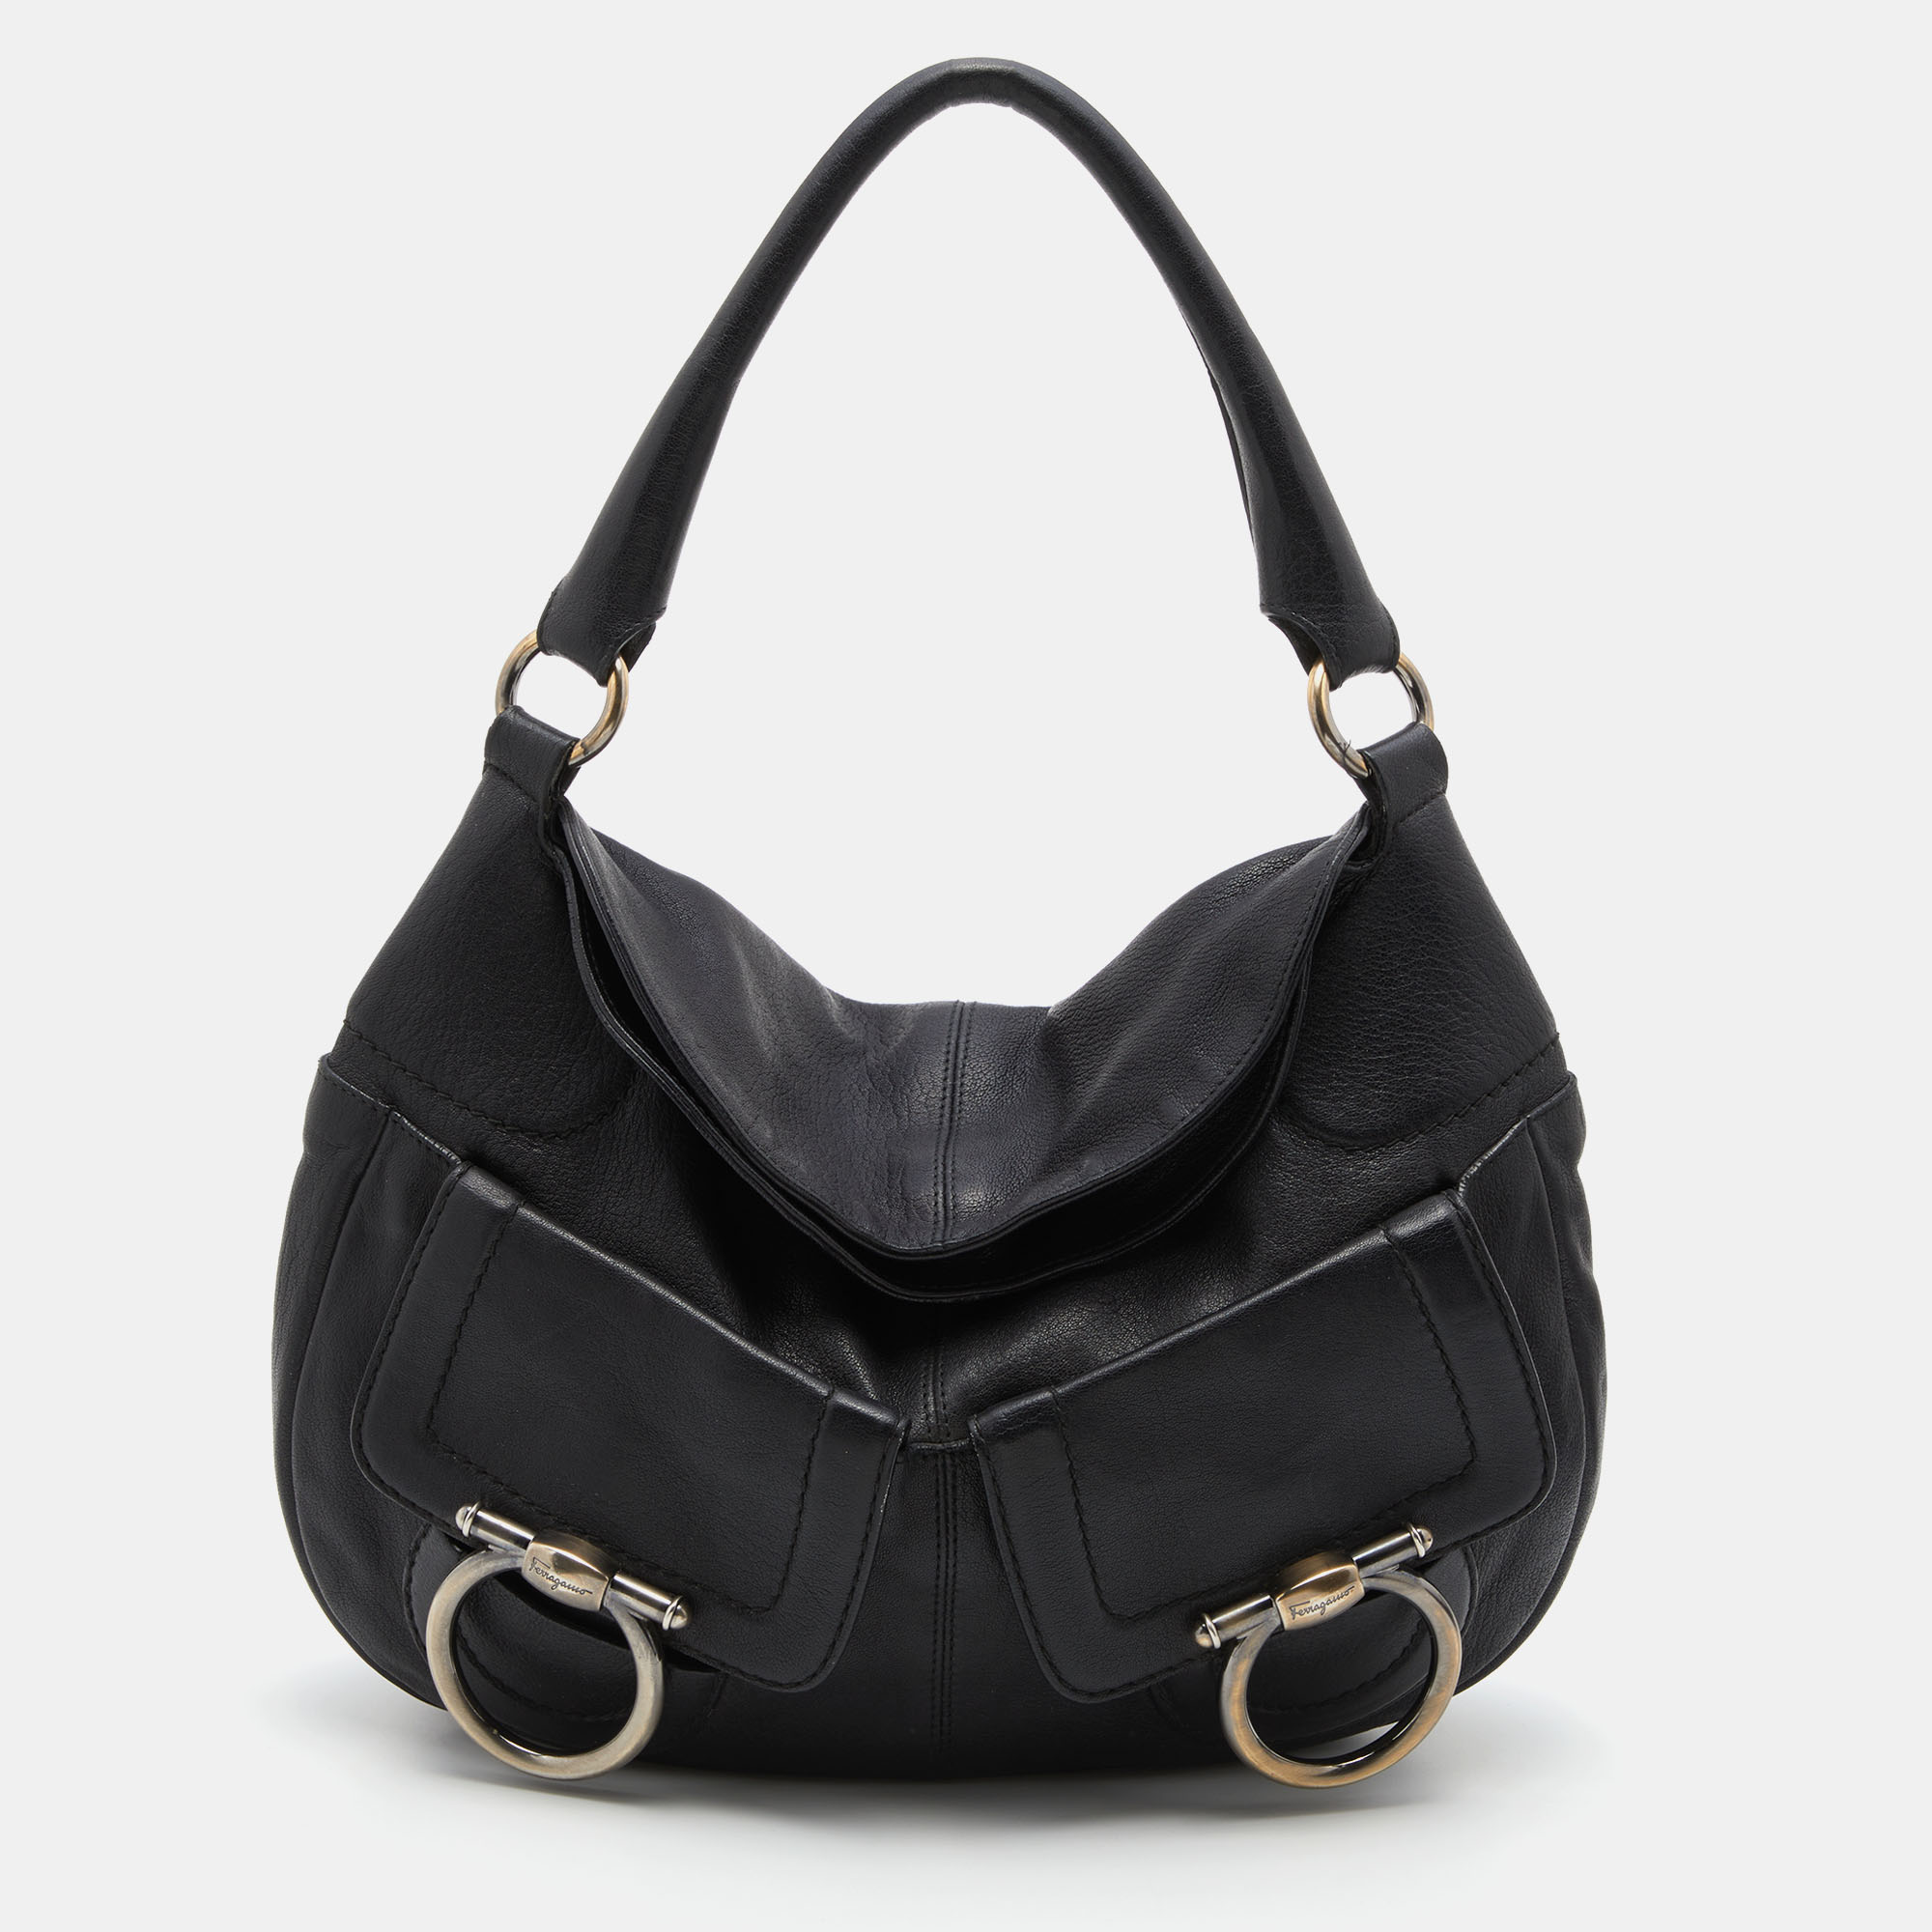 Designer bags are ideal companions for ample of occasions Here we have a fashion meets functionality piece crafted with precision. It has been equipped with a well sized interior that can easily fit in all your essentials.